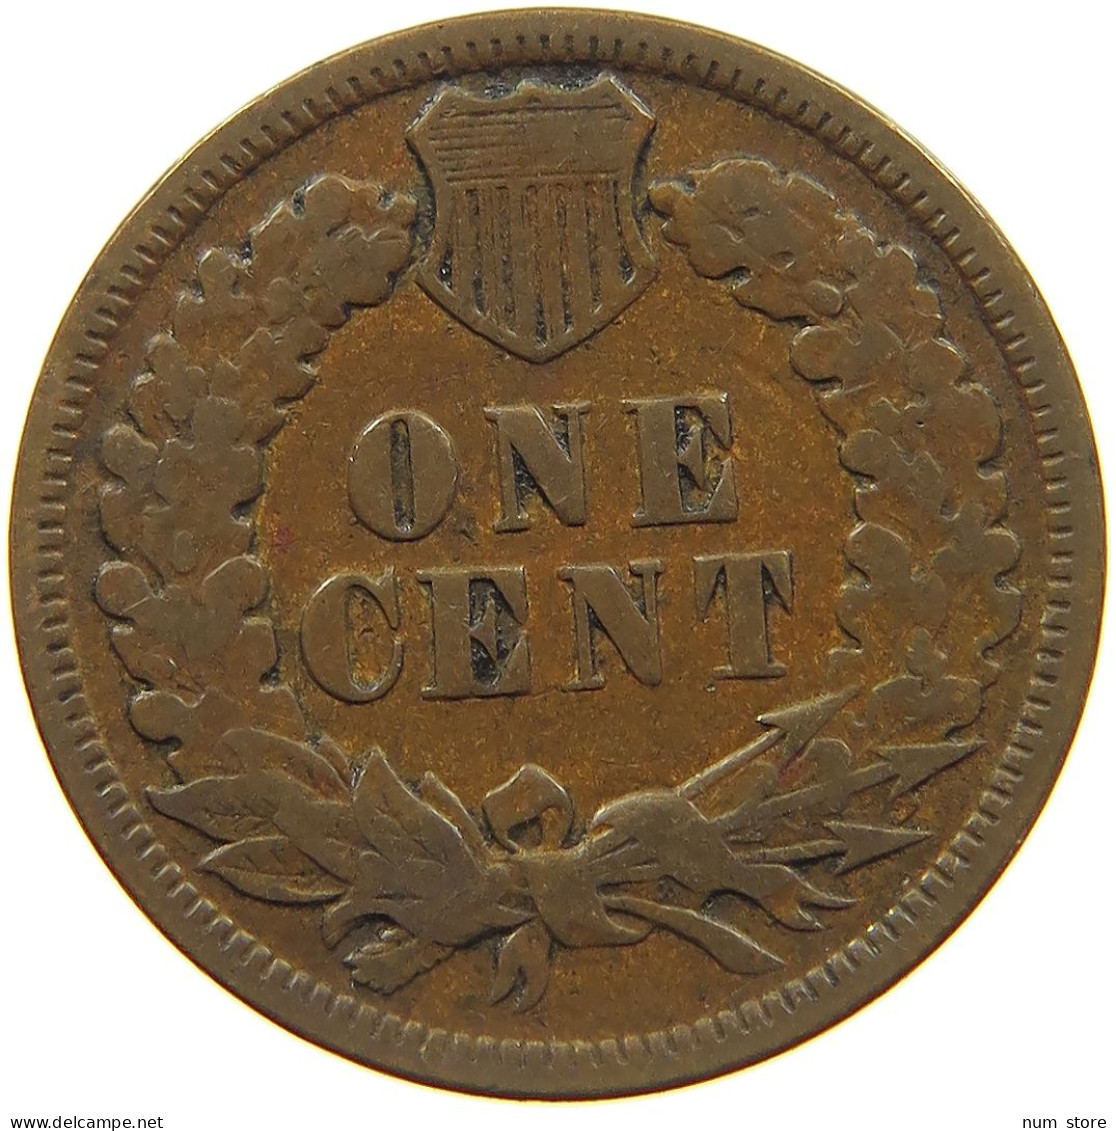 UNITED STATES OF AMERICA CENT 1894 INDIAN HEAD #c012 0111 - 1859-1909: Indian Head